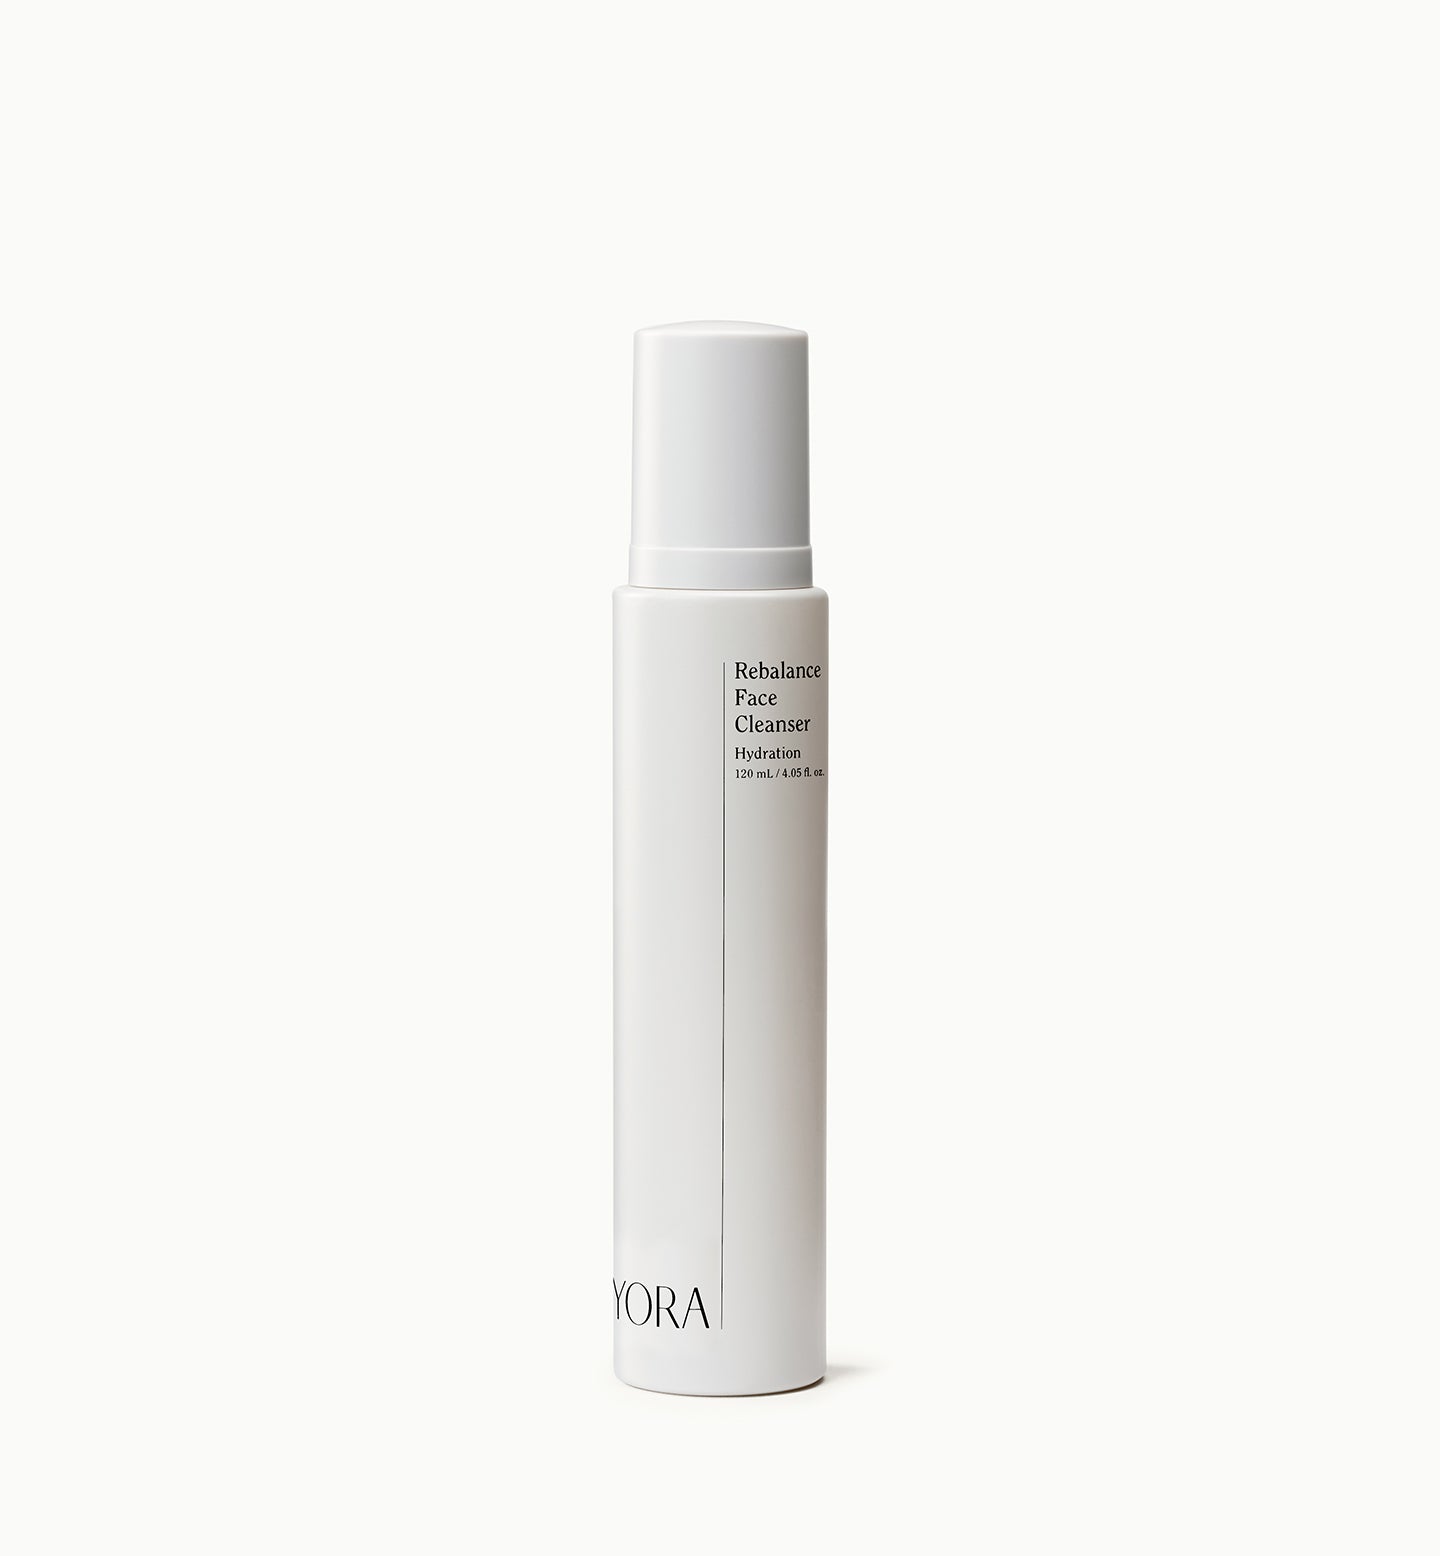 Rebalance Face Cleanser - Front